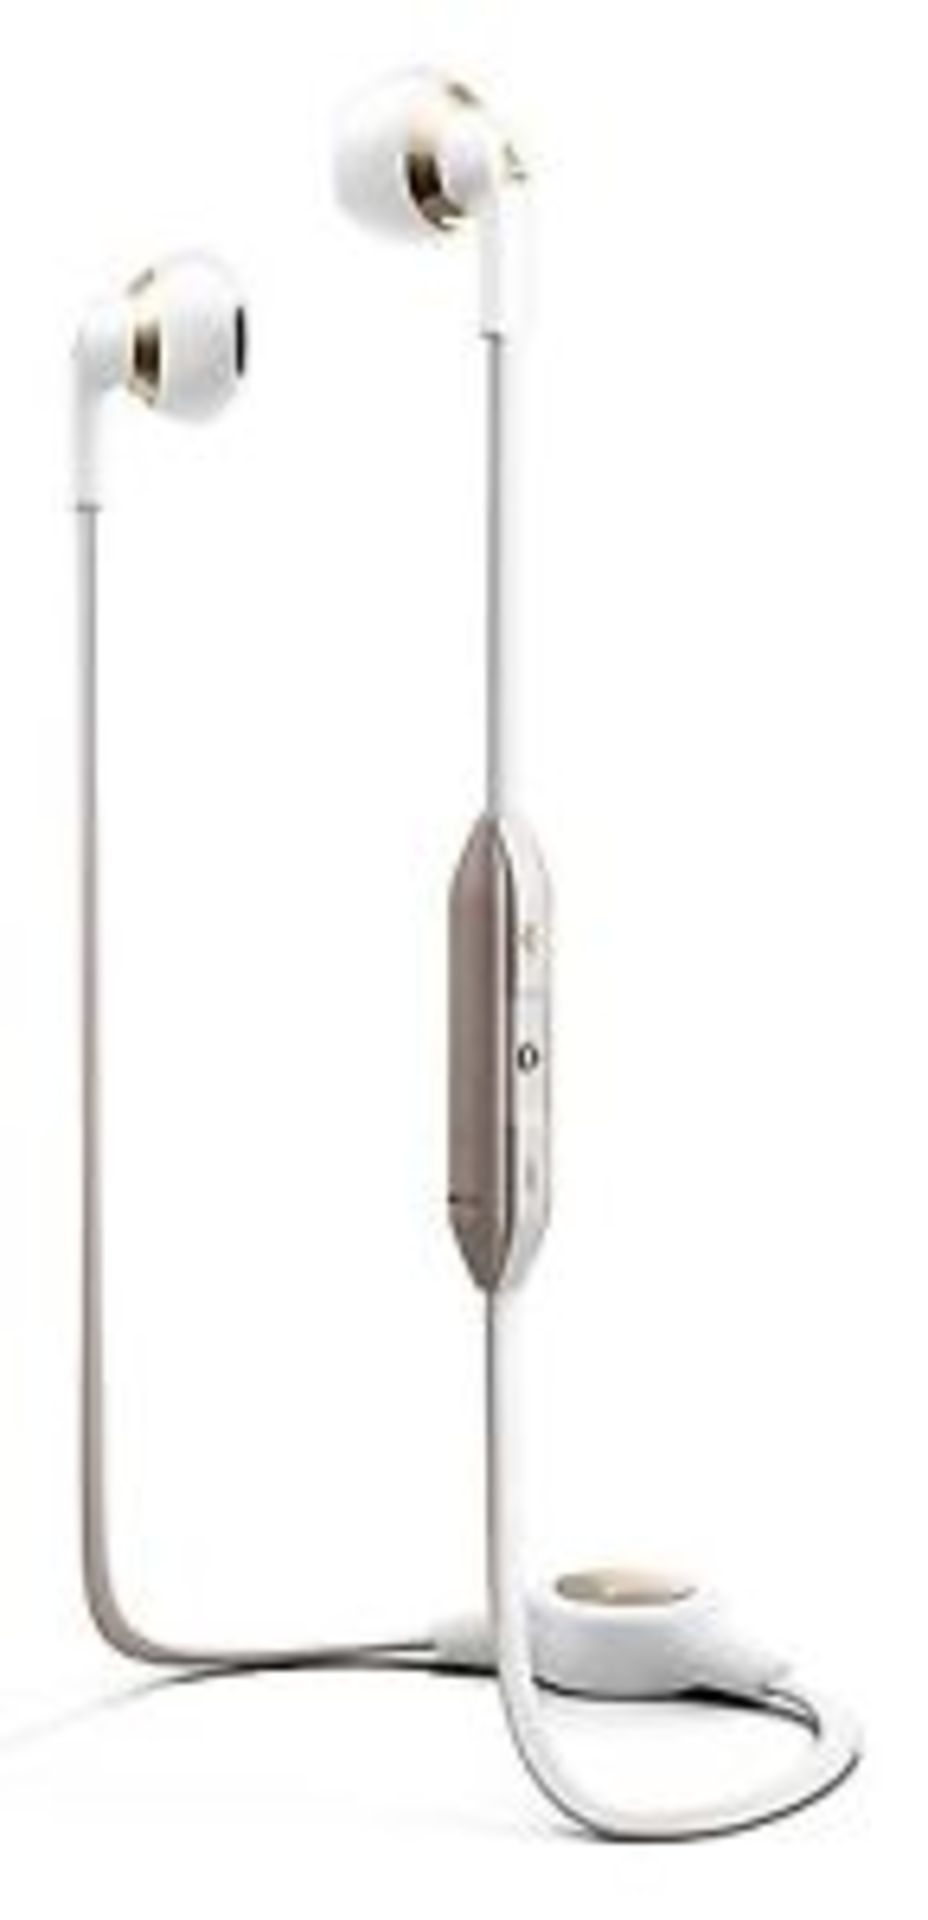 V Brand New Gibson Trainer In-Ear Wireless Headphones With Bluetooth Amazon Price £89.99 - Two